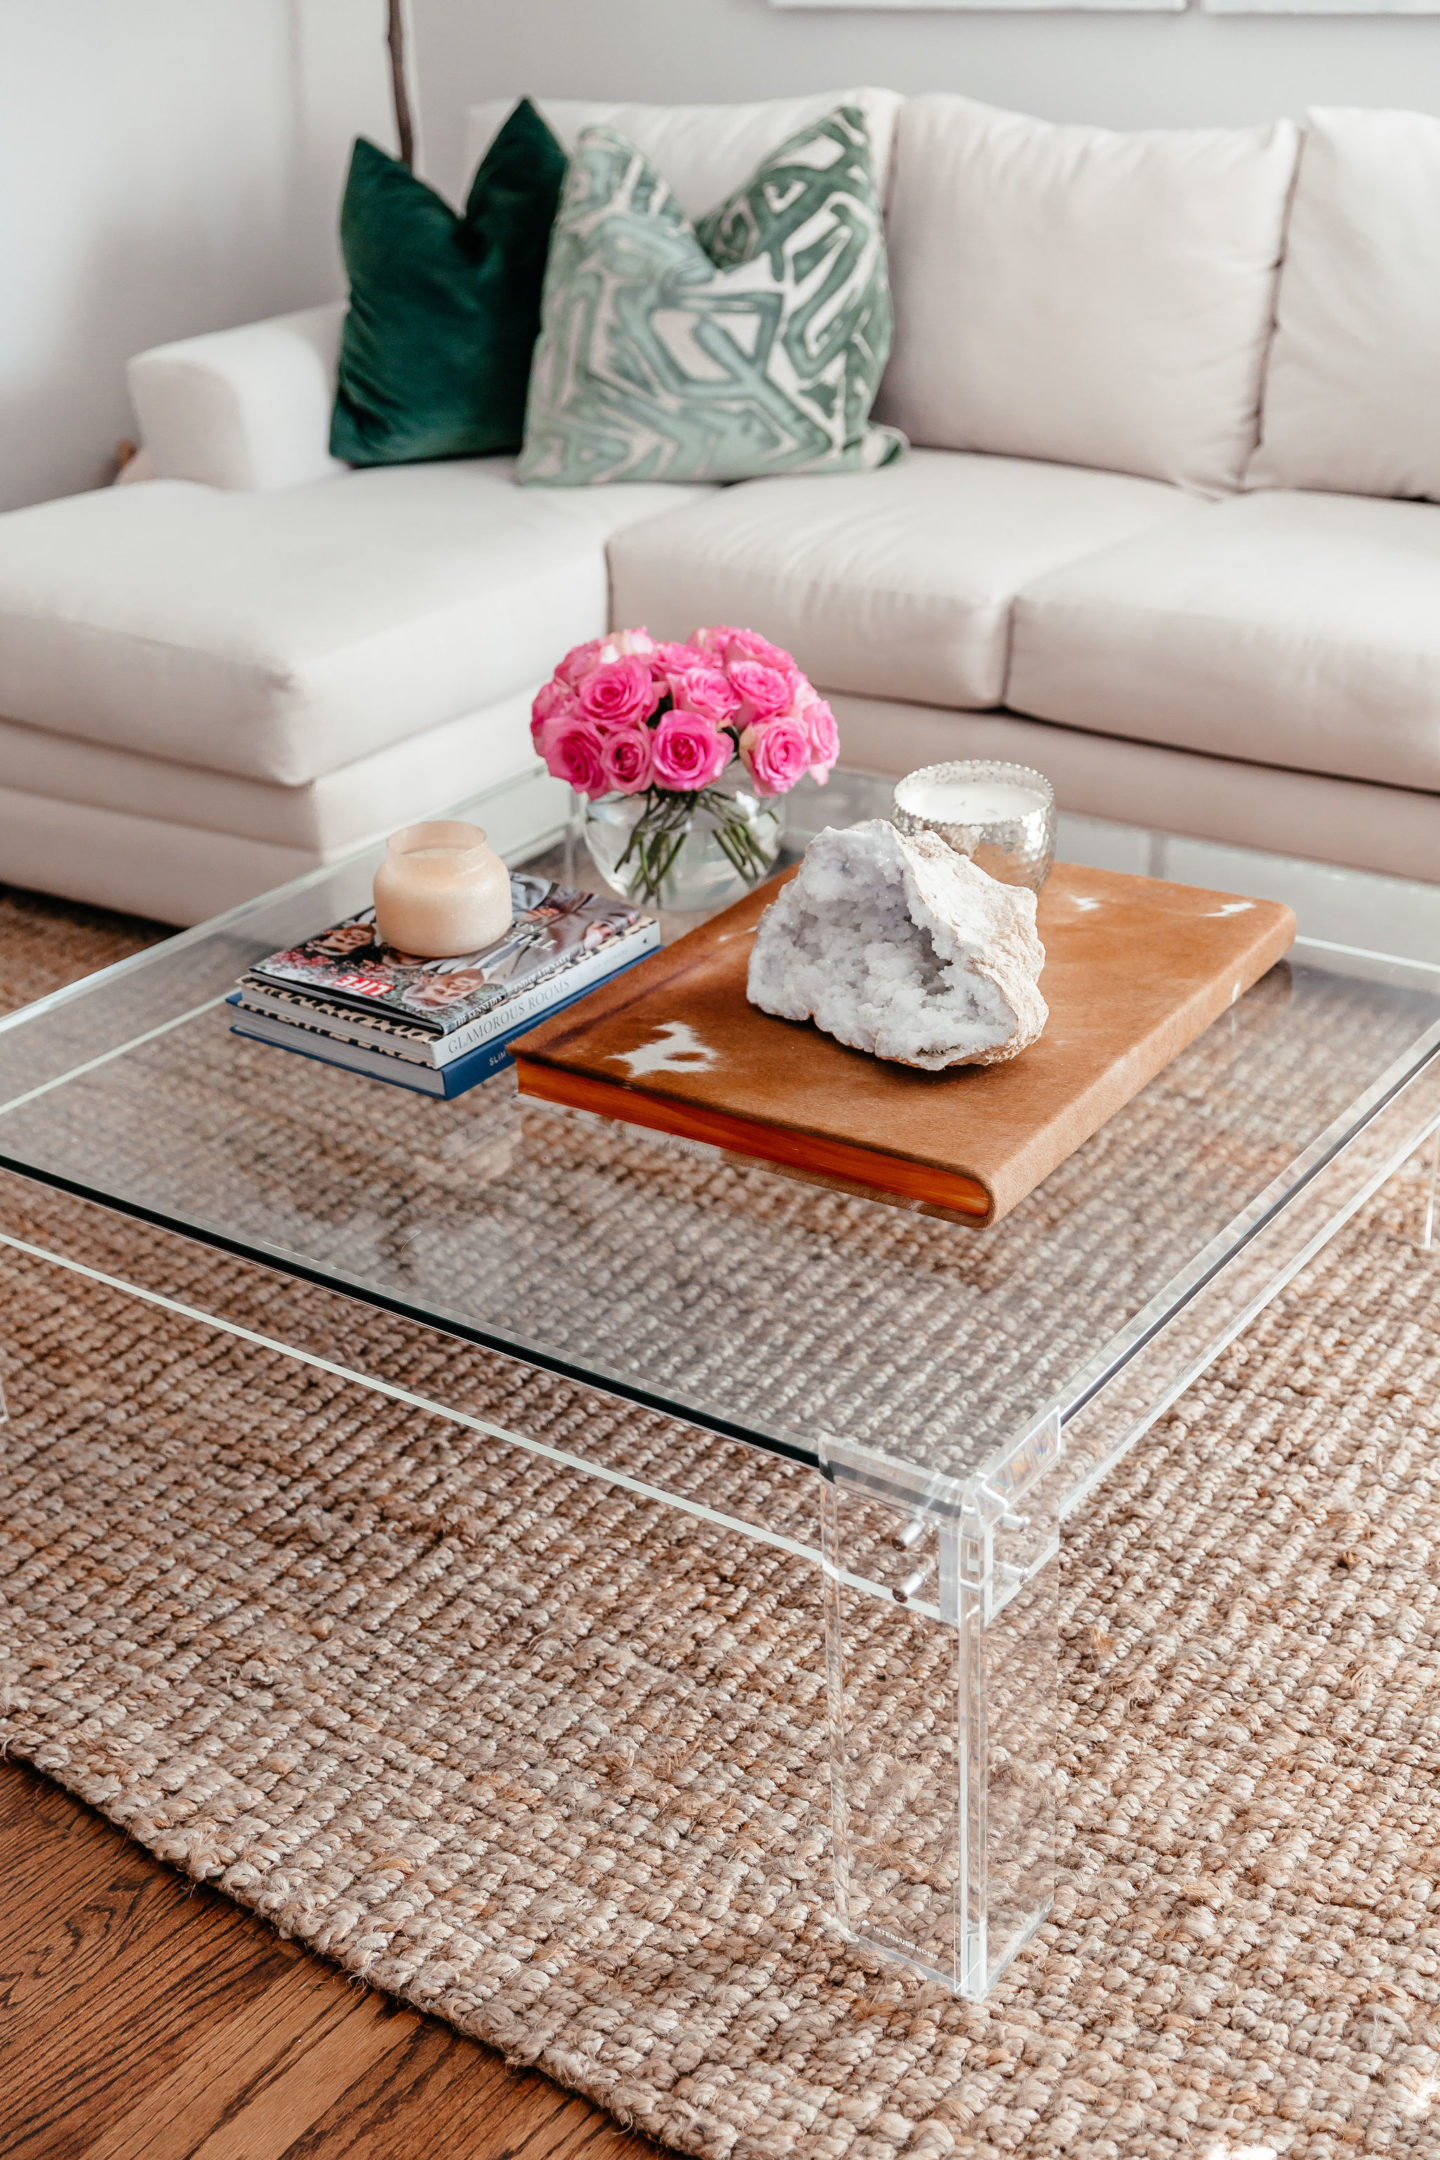 A square acrylic coffee table decorated with books, candles, some flowers and a geode